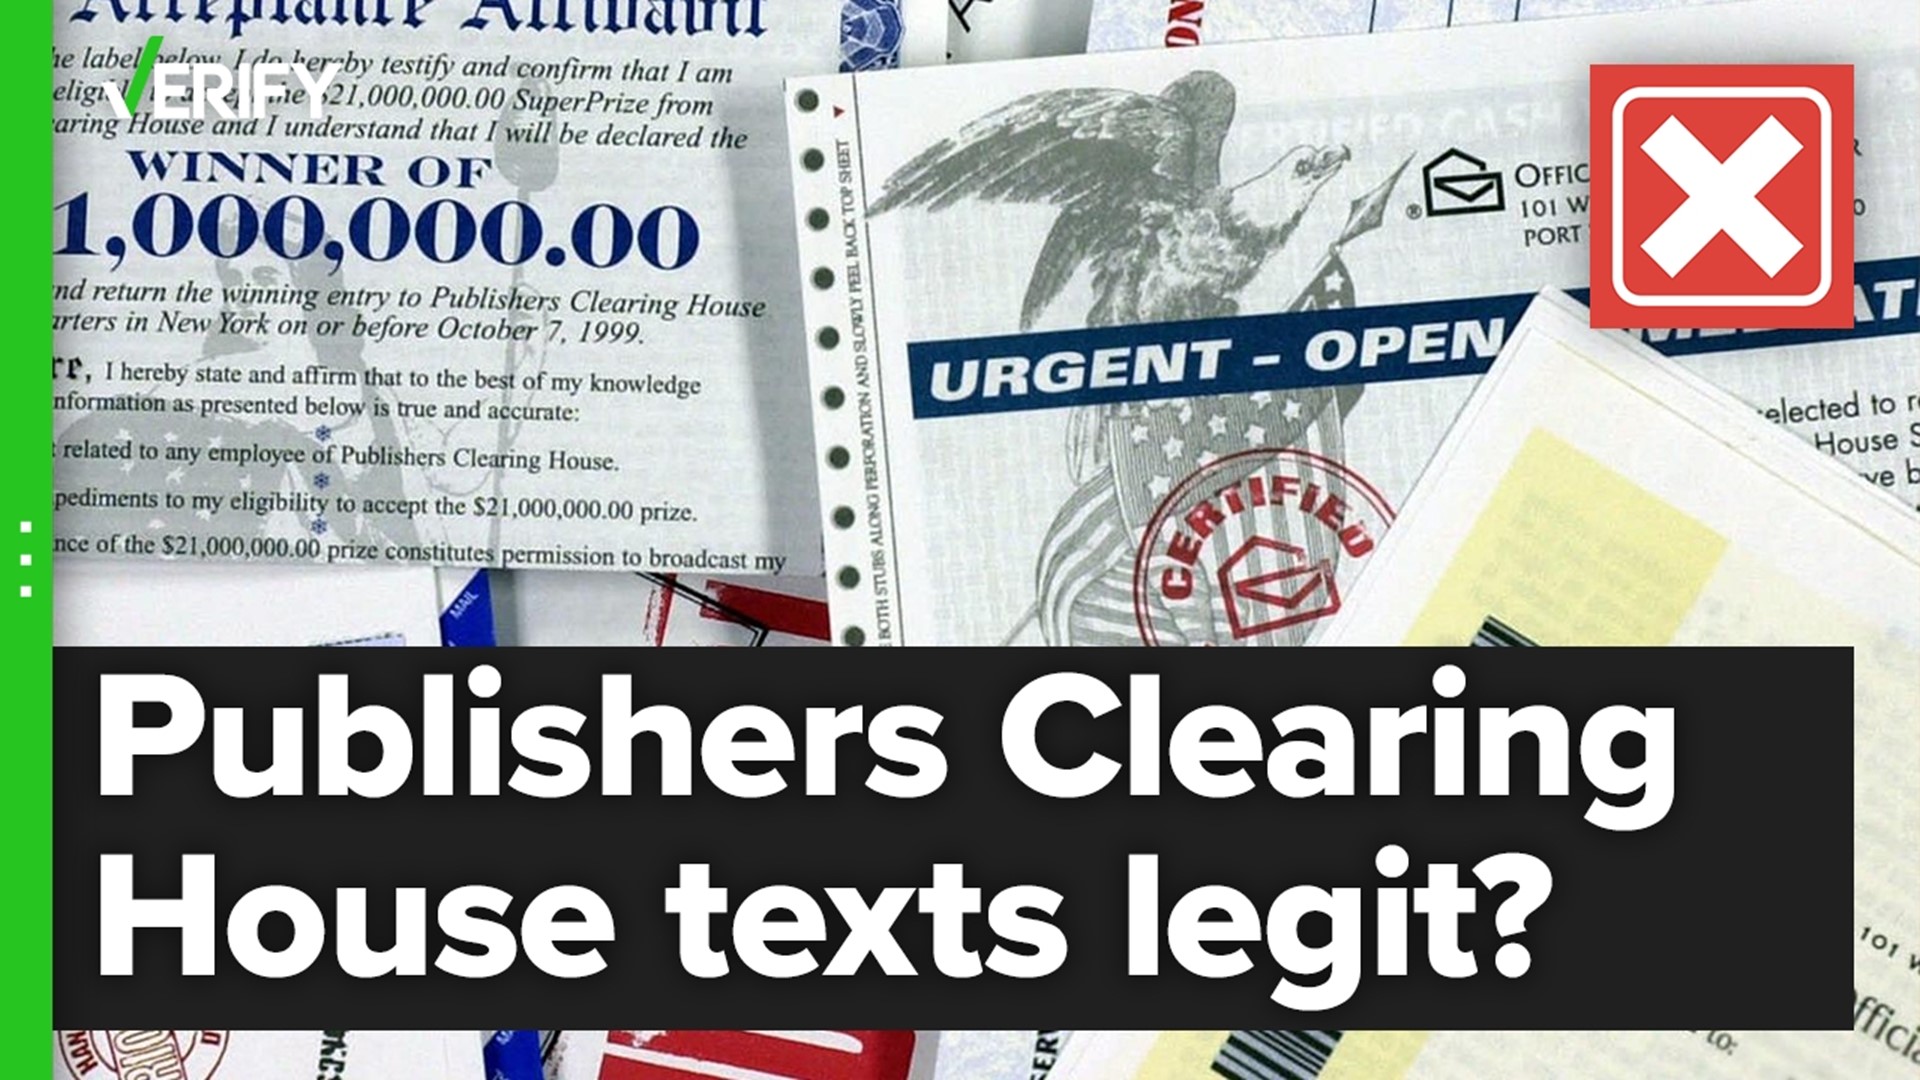 Does Publishers Clearing House ask winners for money to receive a prize? The VERIFY team confirms this is false.